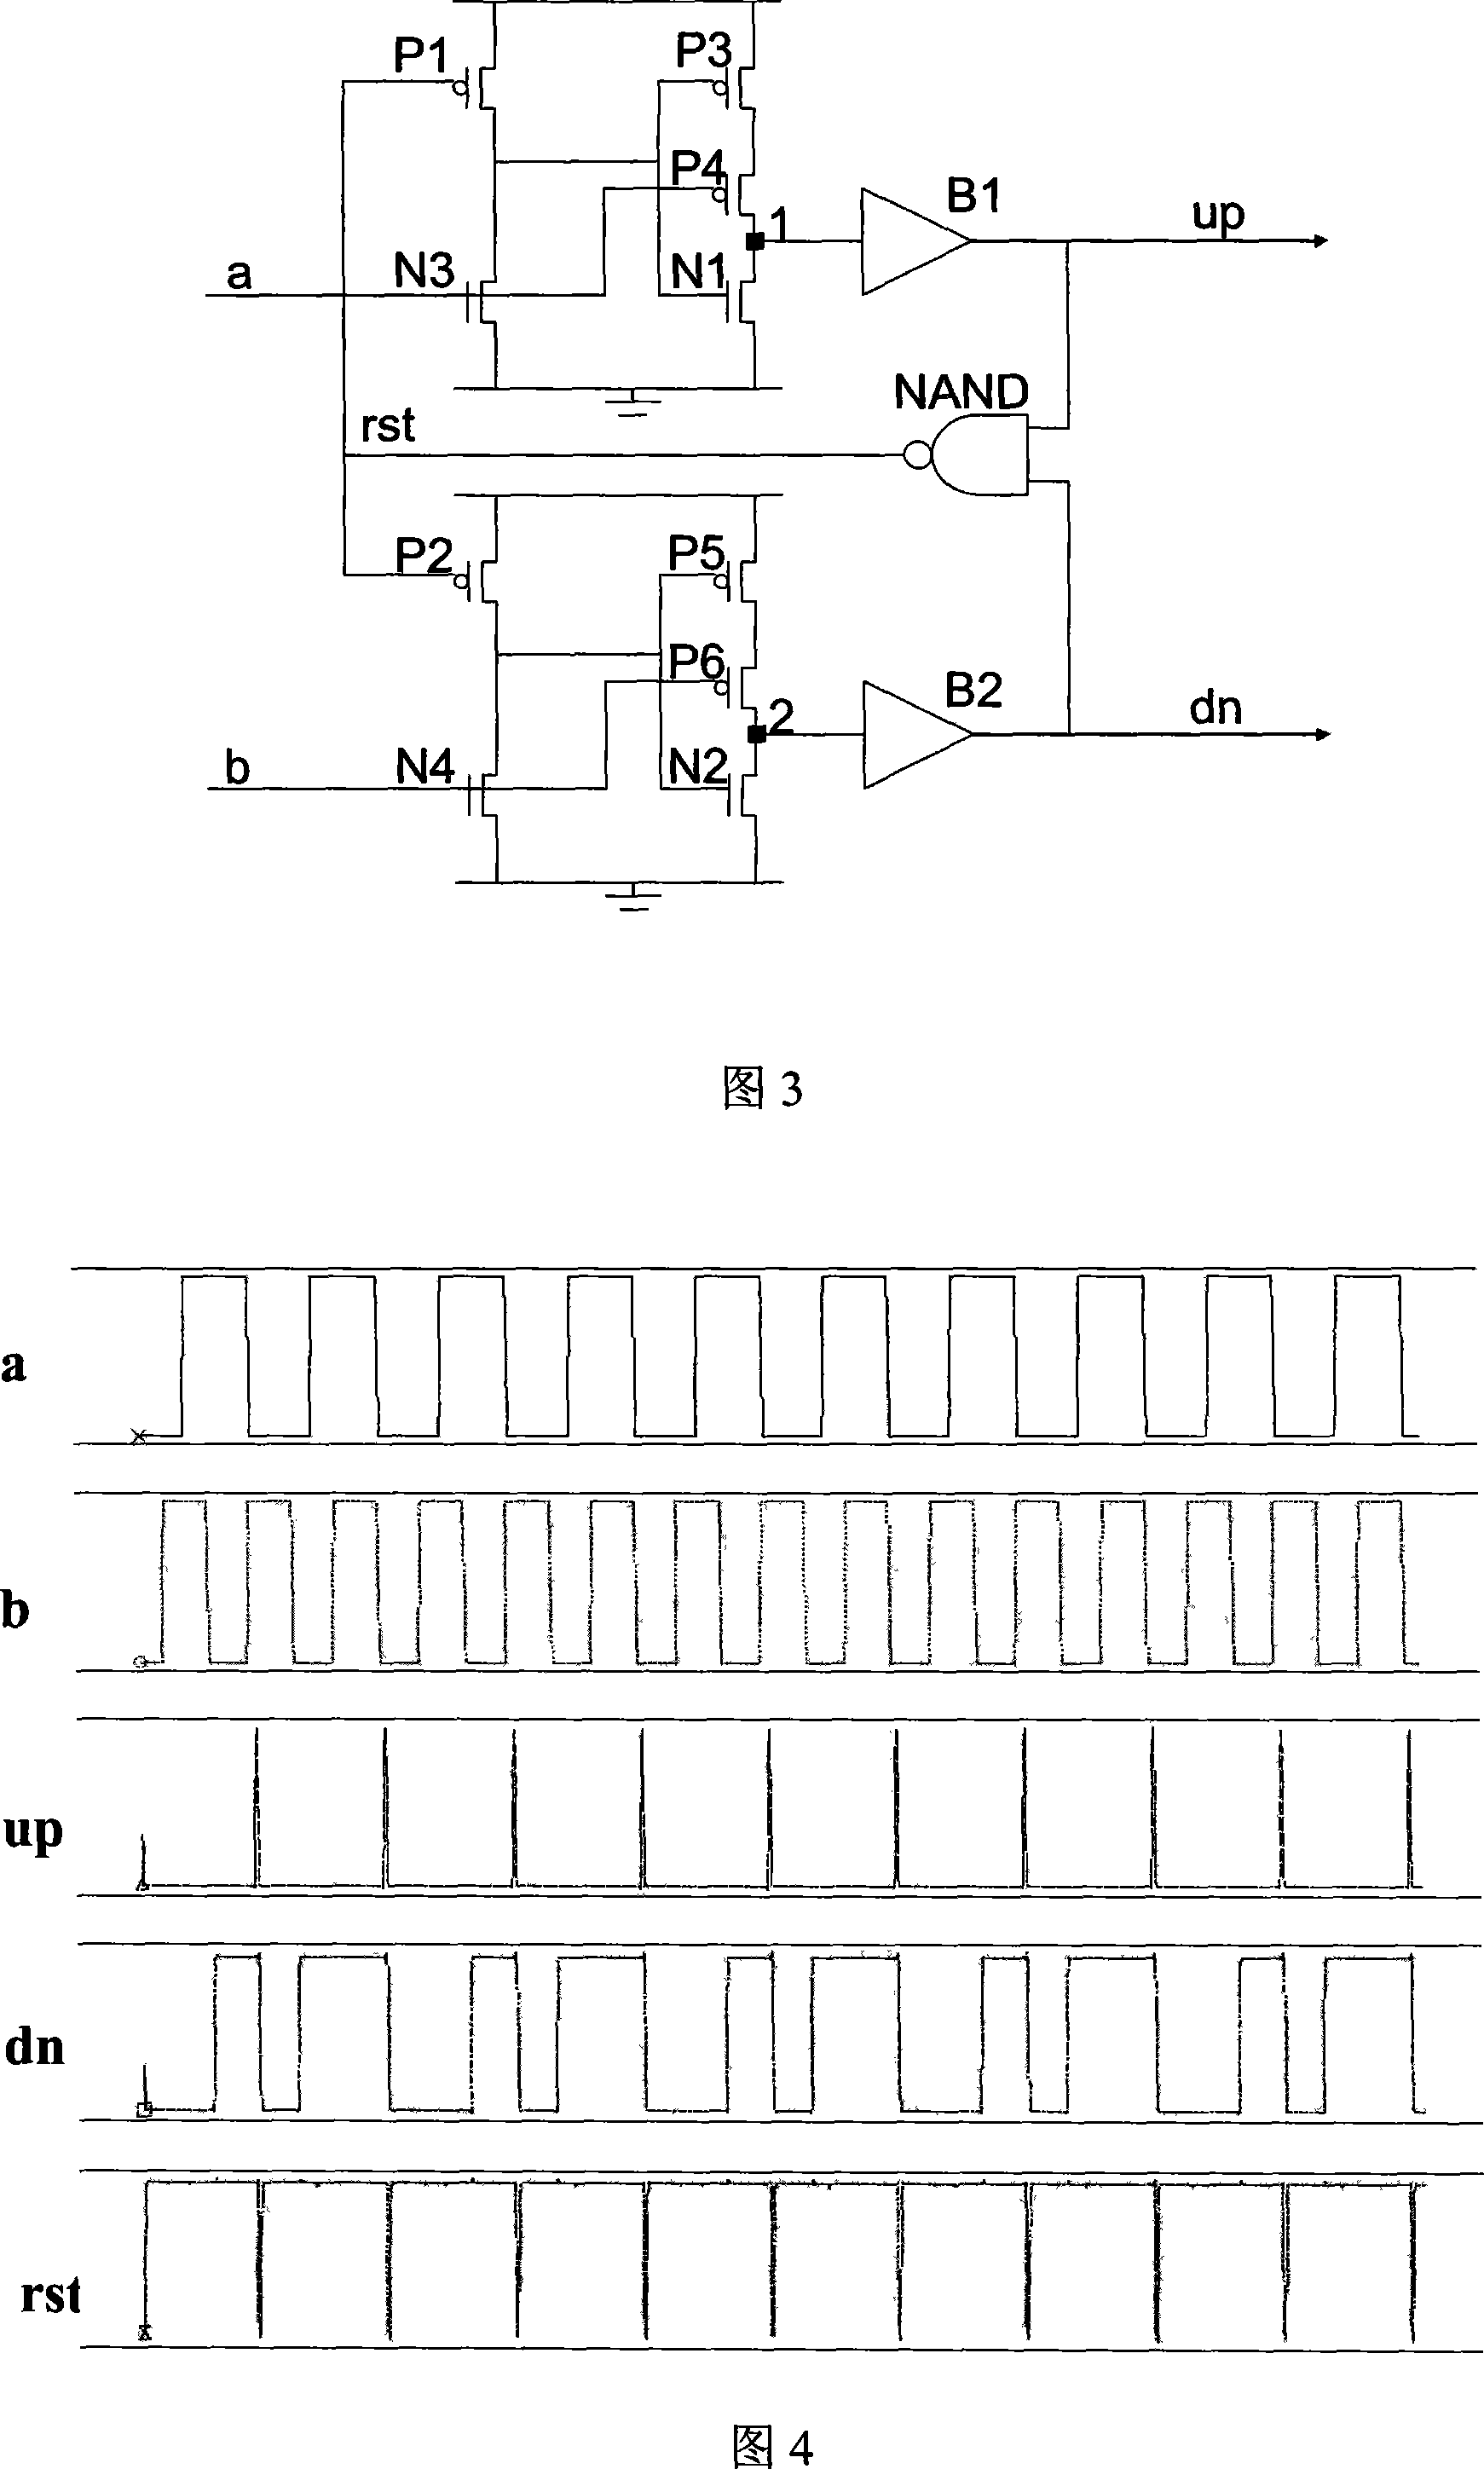 Phase frequency discriminator